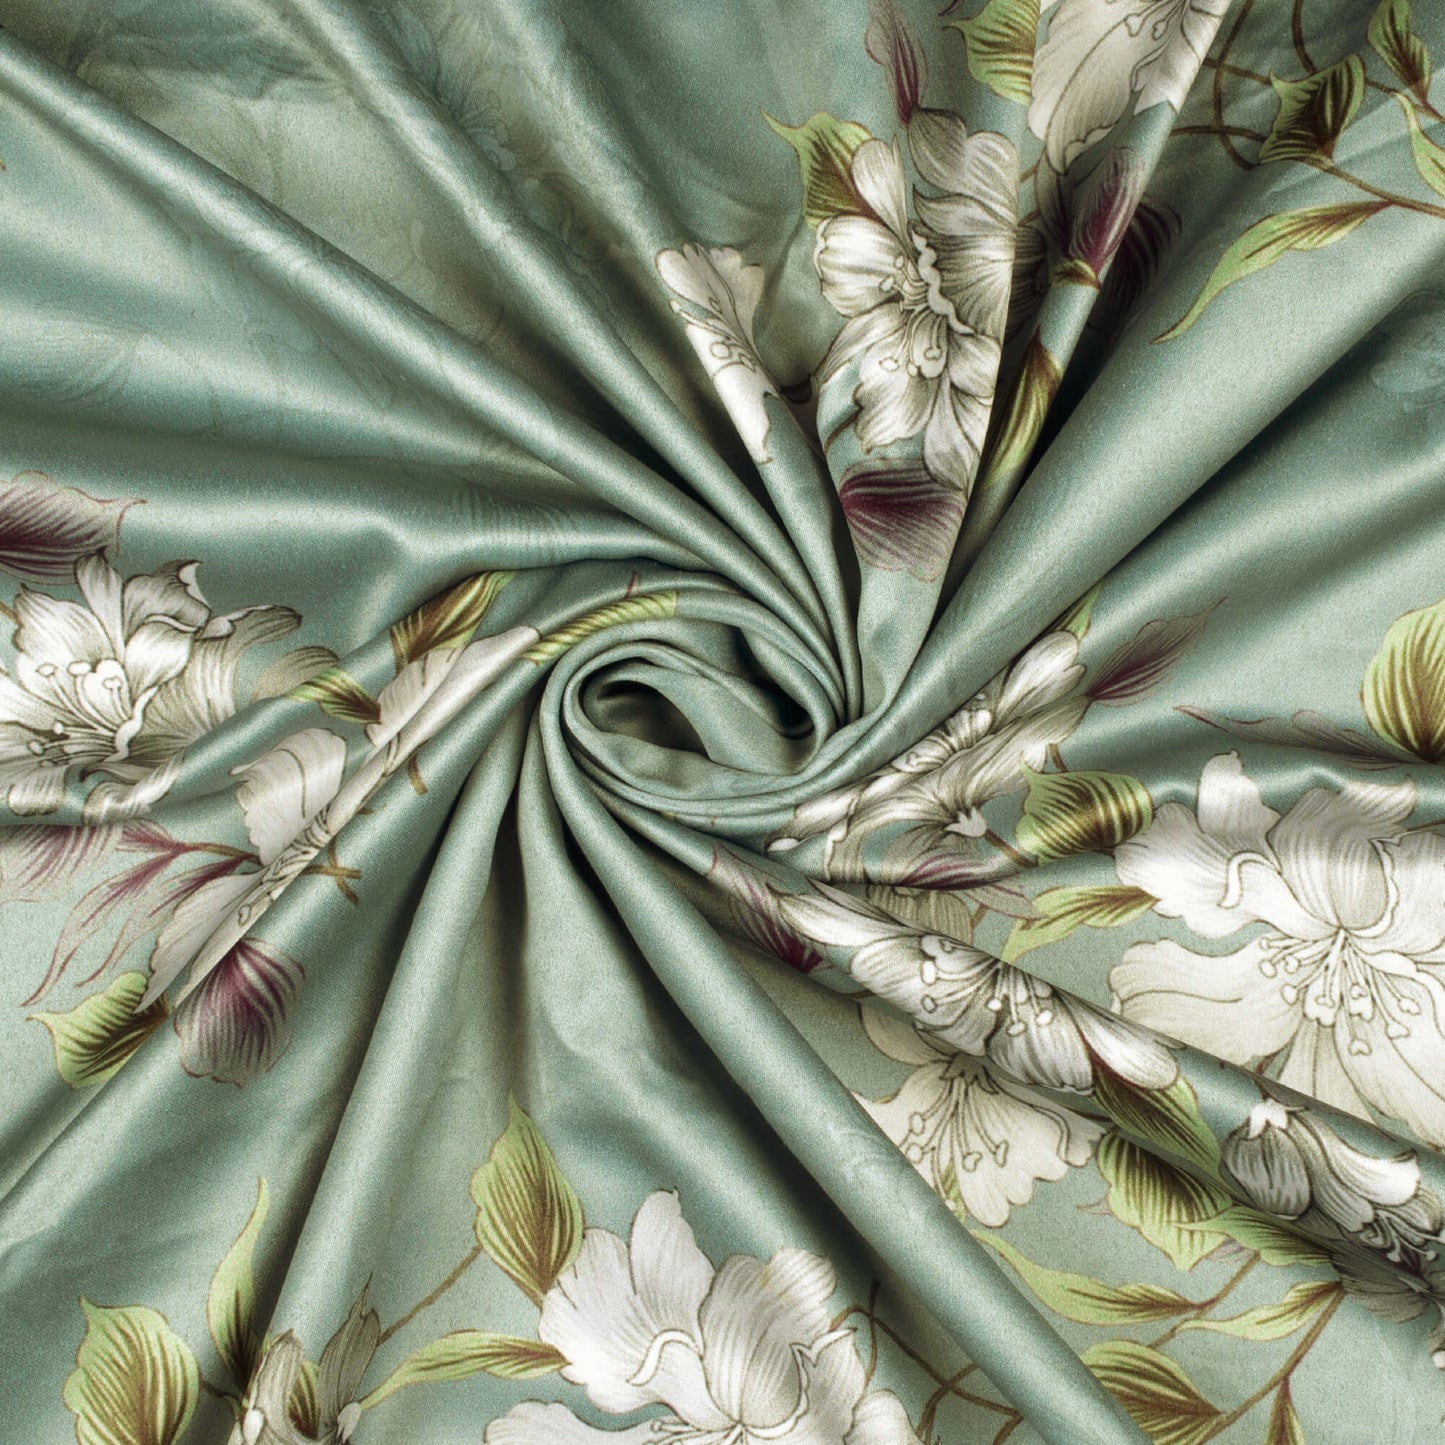 Ditya's Choice Smoke Grey And White Floral Pattern Digital Print Charmeuse Satin Fabric (Width 58 Inches)